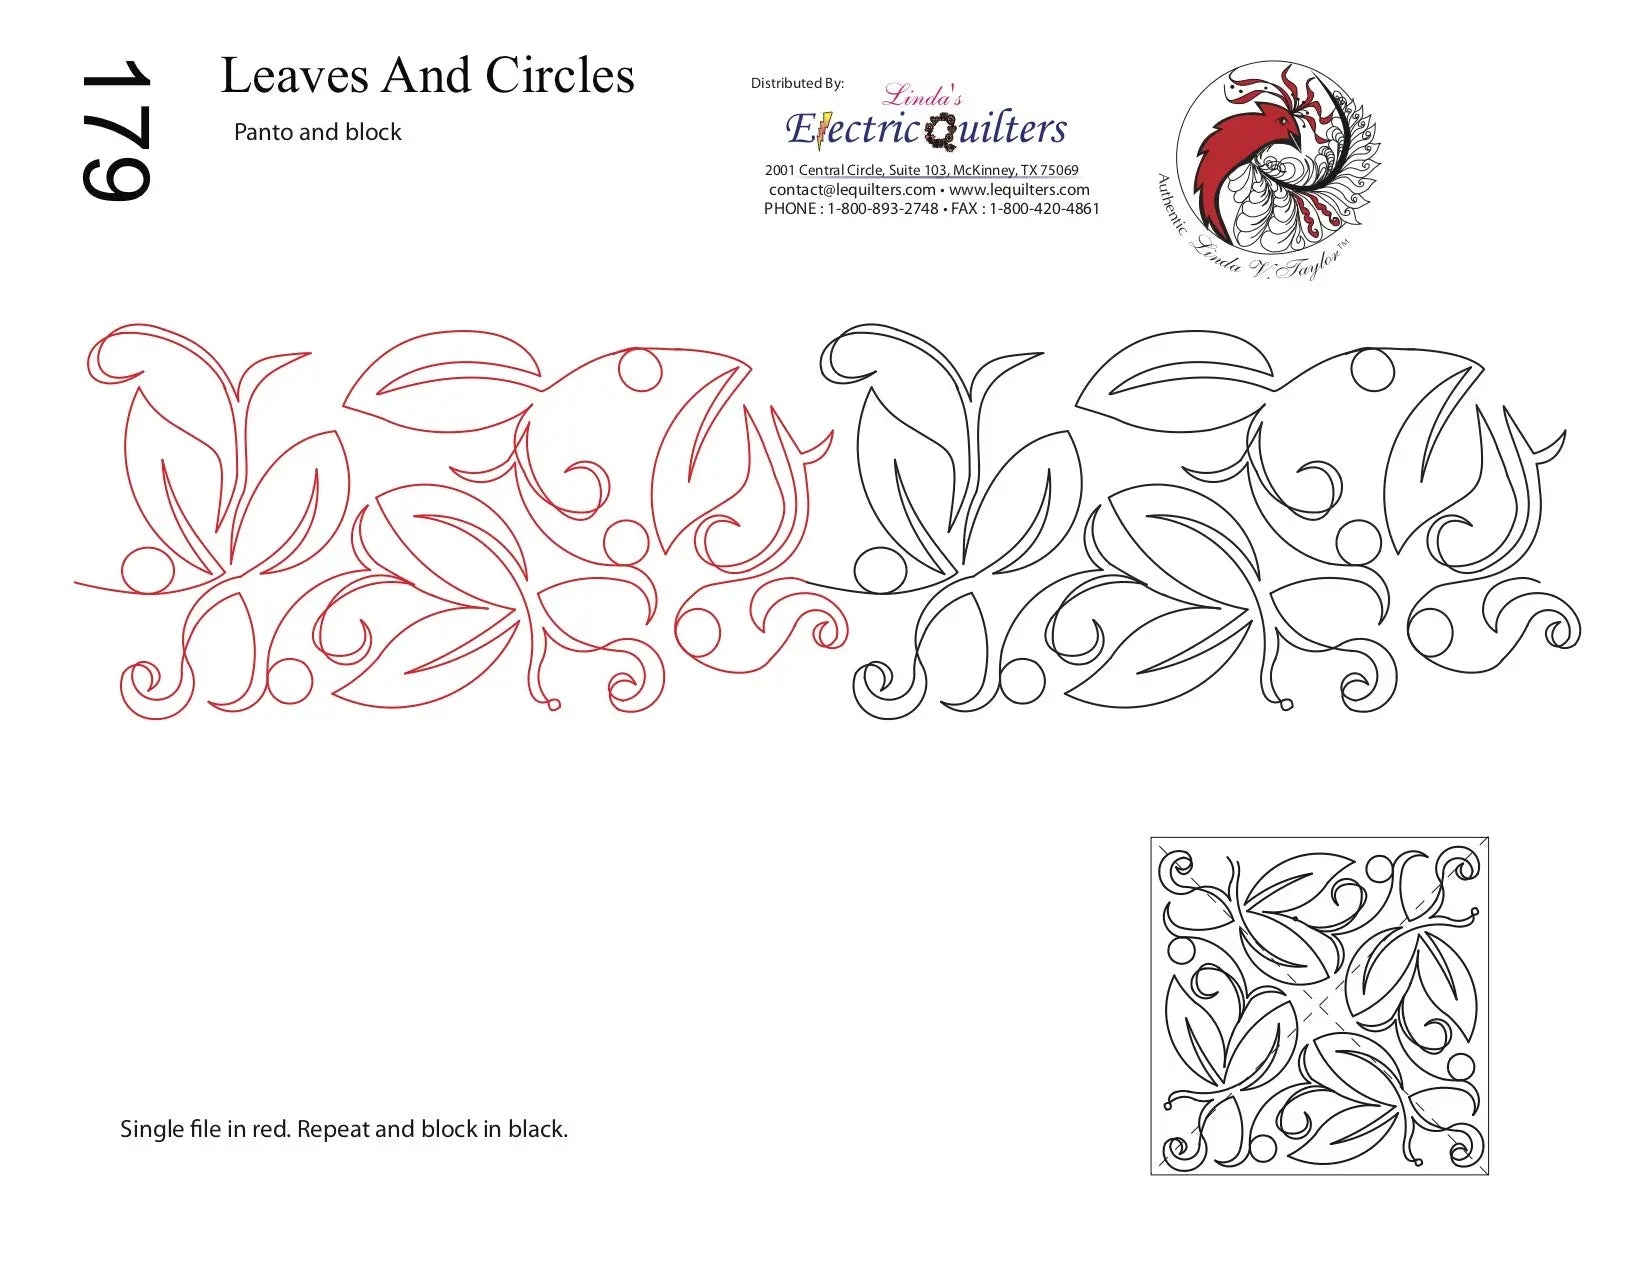 179 Leaves And Circles Pantograph with Blocks by Linda V. Taylor - Linda's Electric Quilters